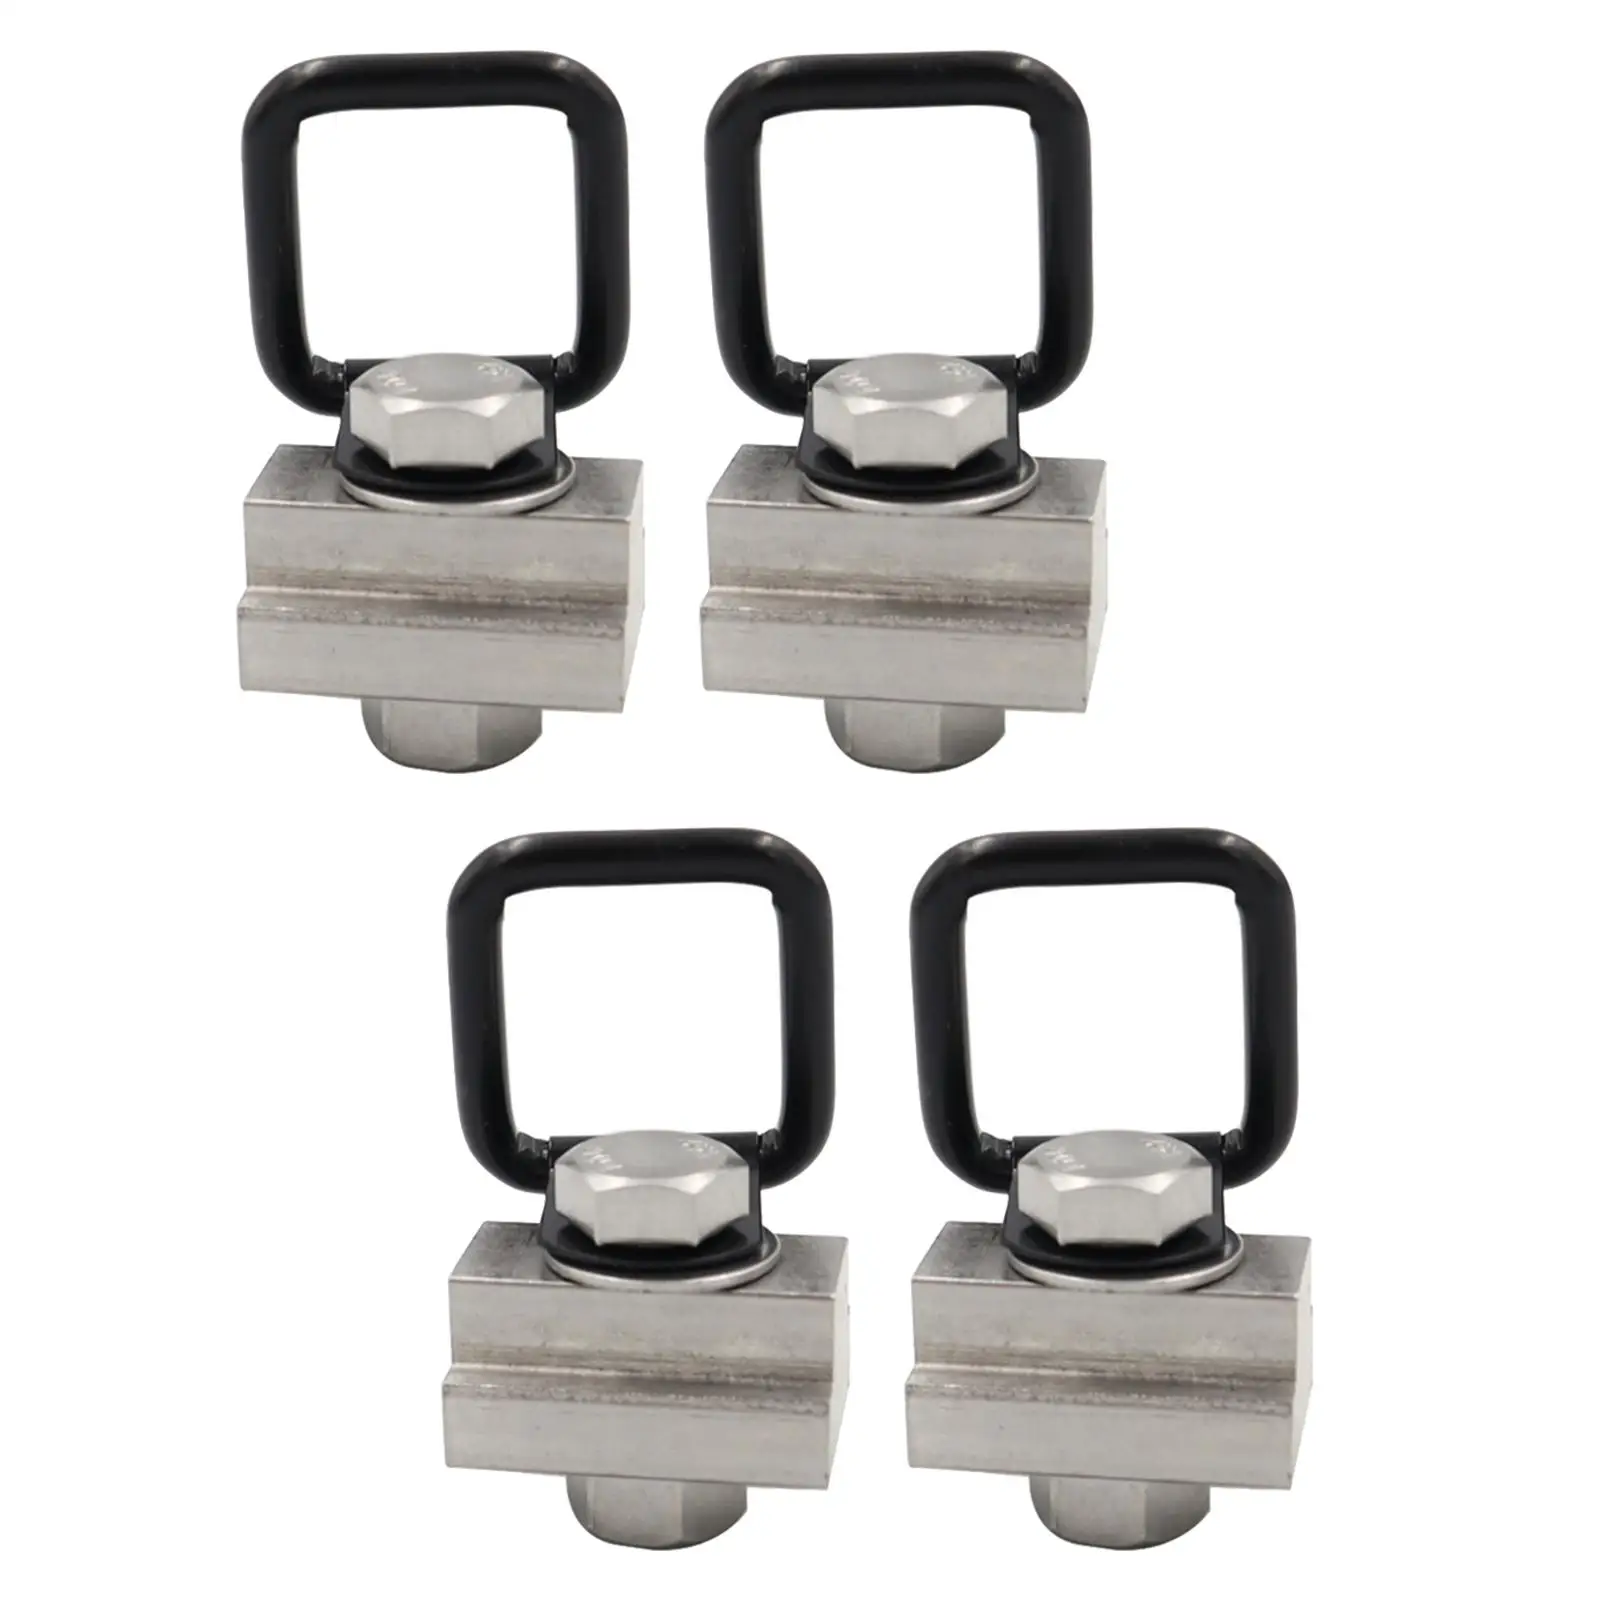 4x Car Bed Rail T Slot Nuts Kit with 3/8